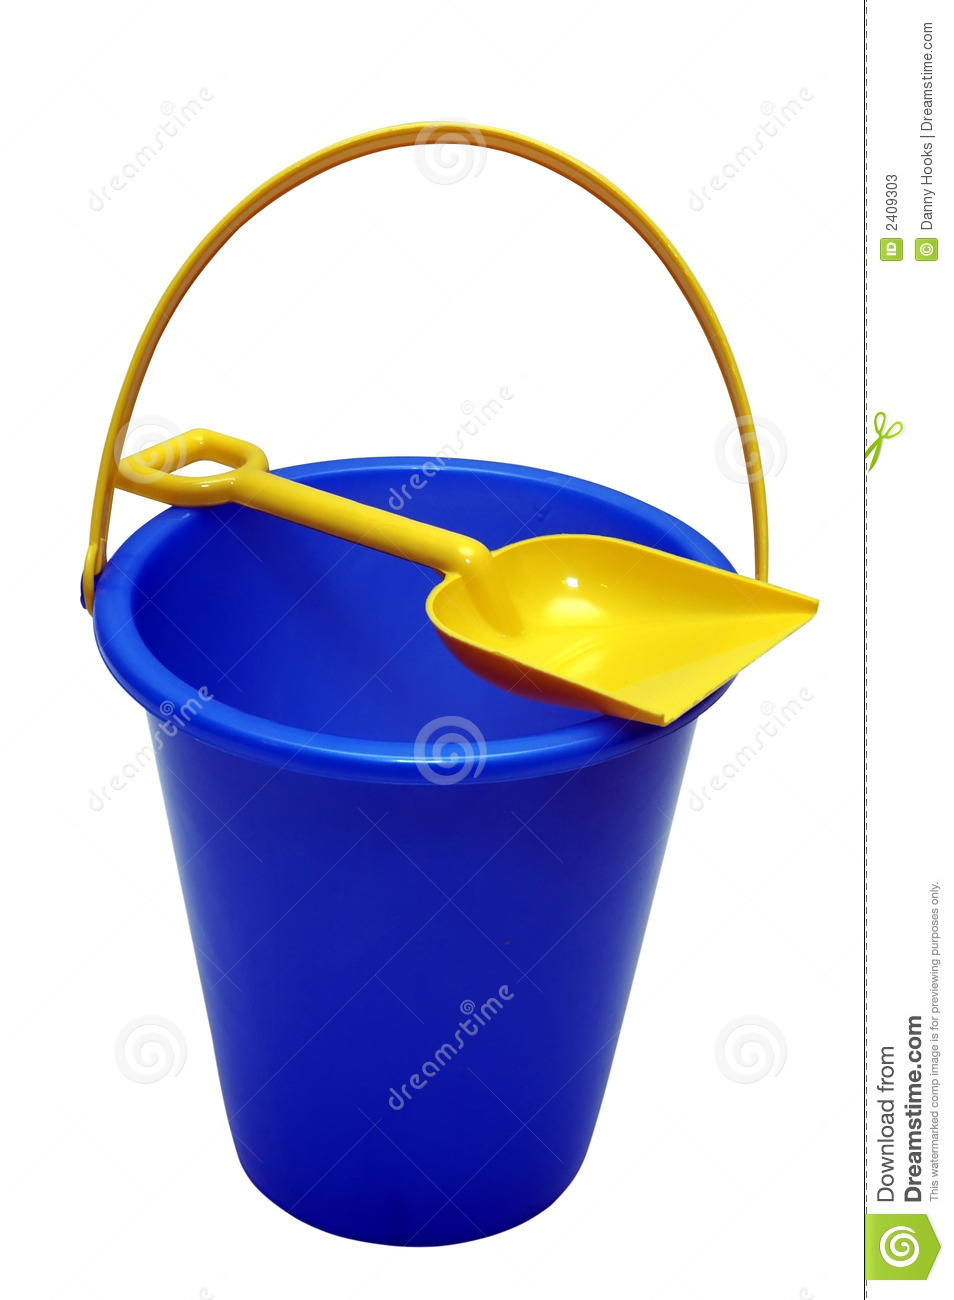 Sand Pail With Shovel  Isolated Image With Clipping Path